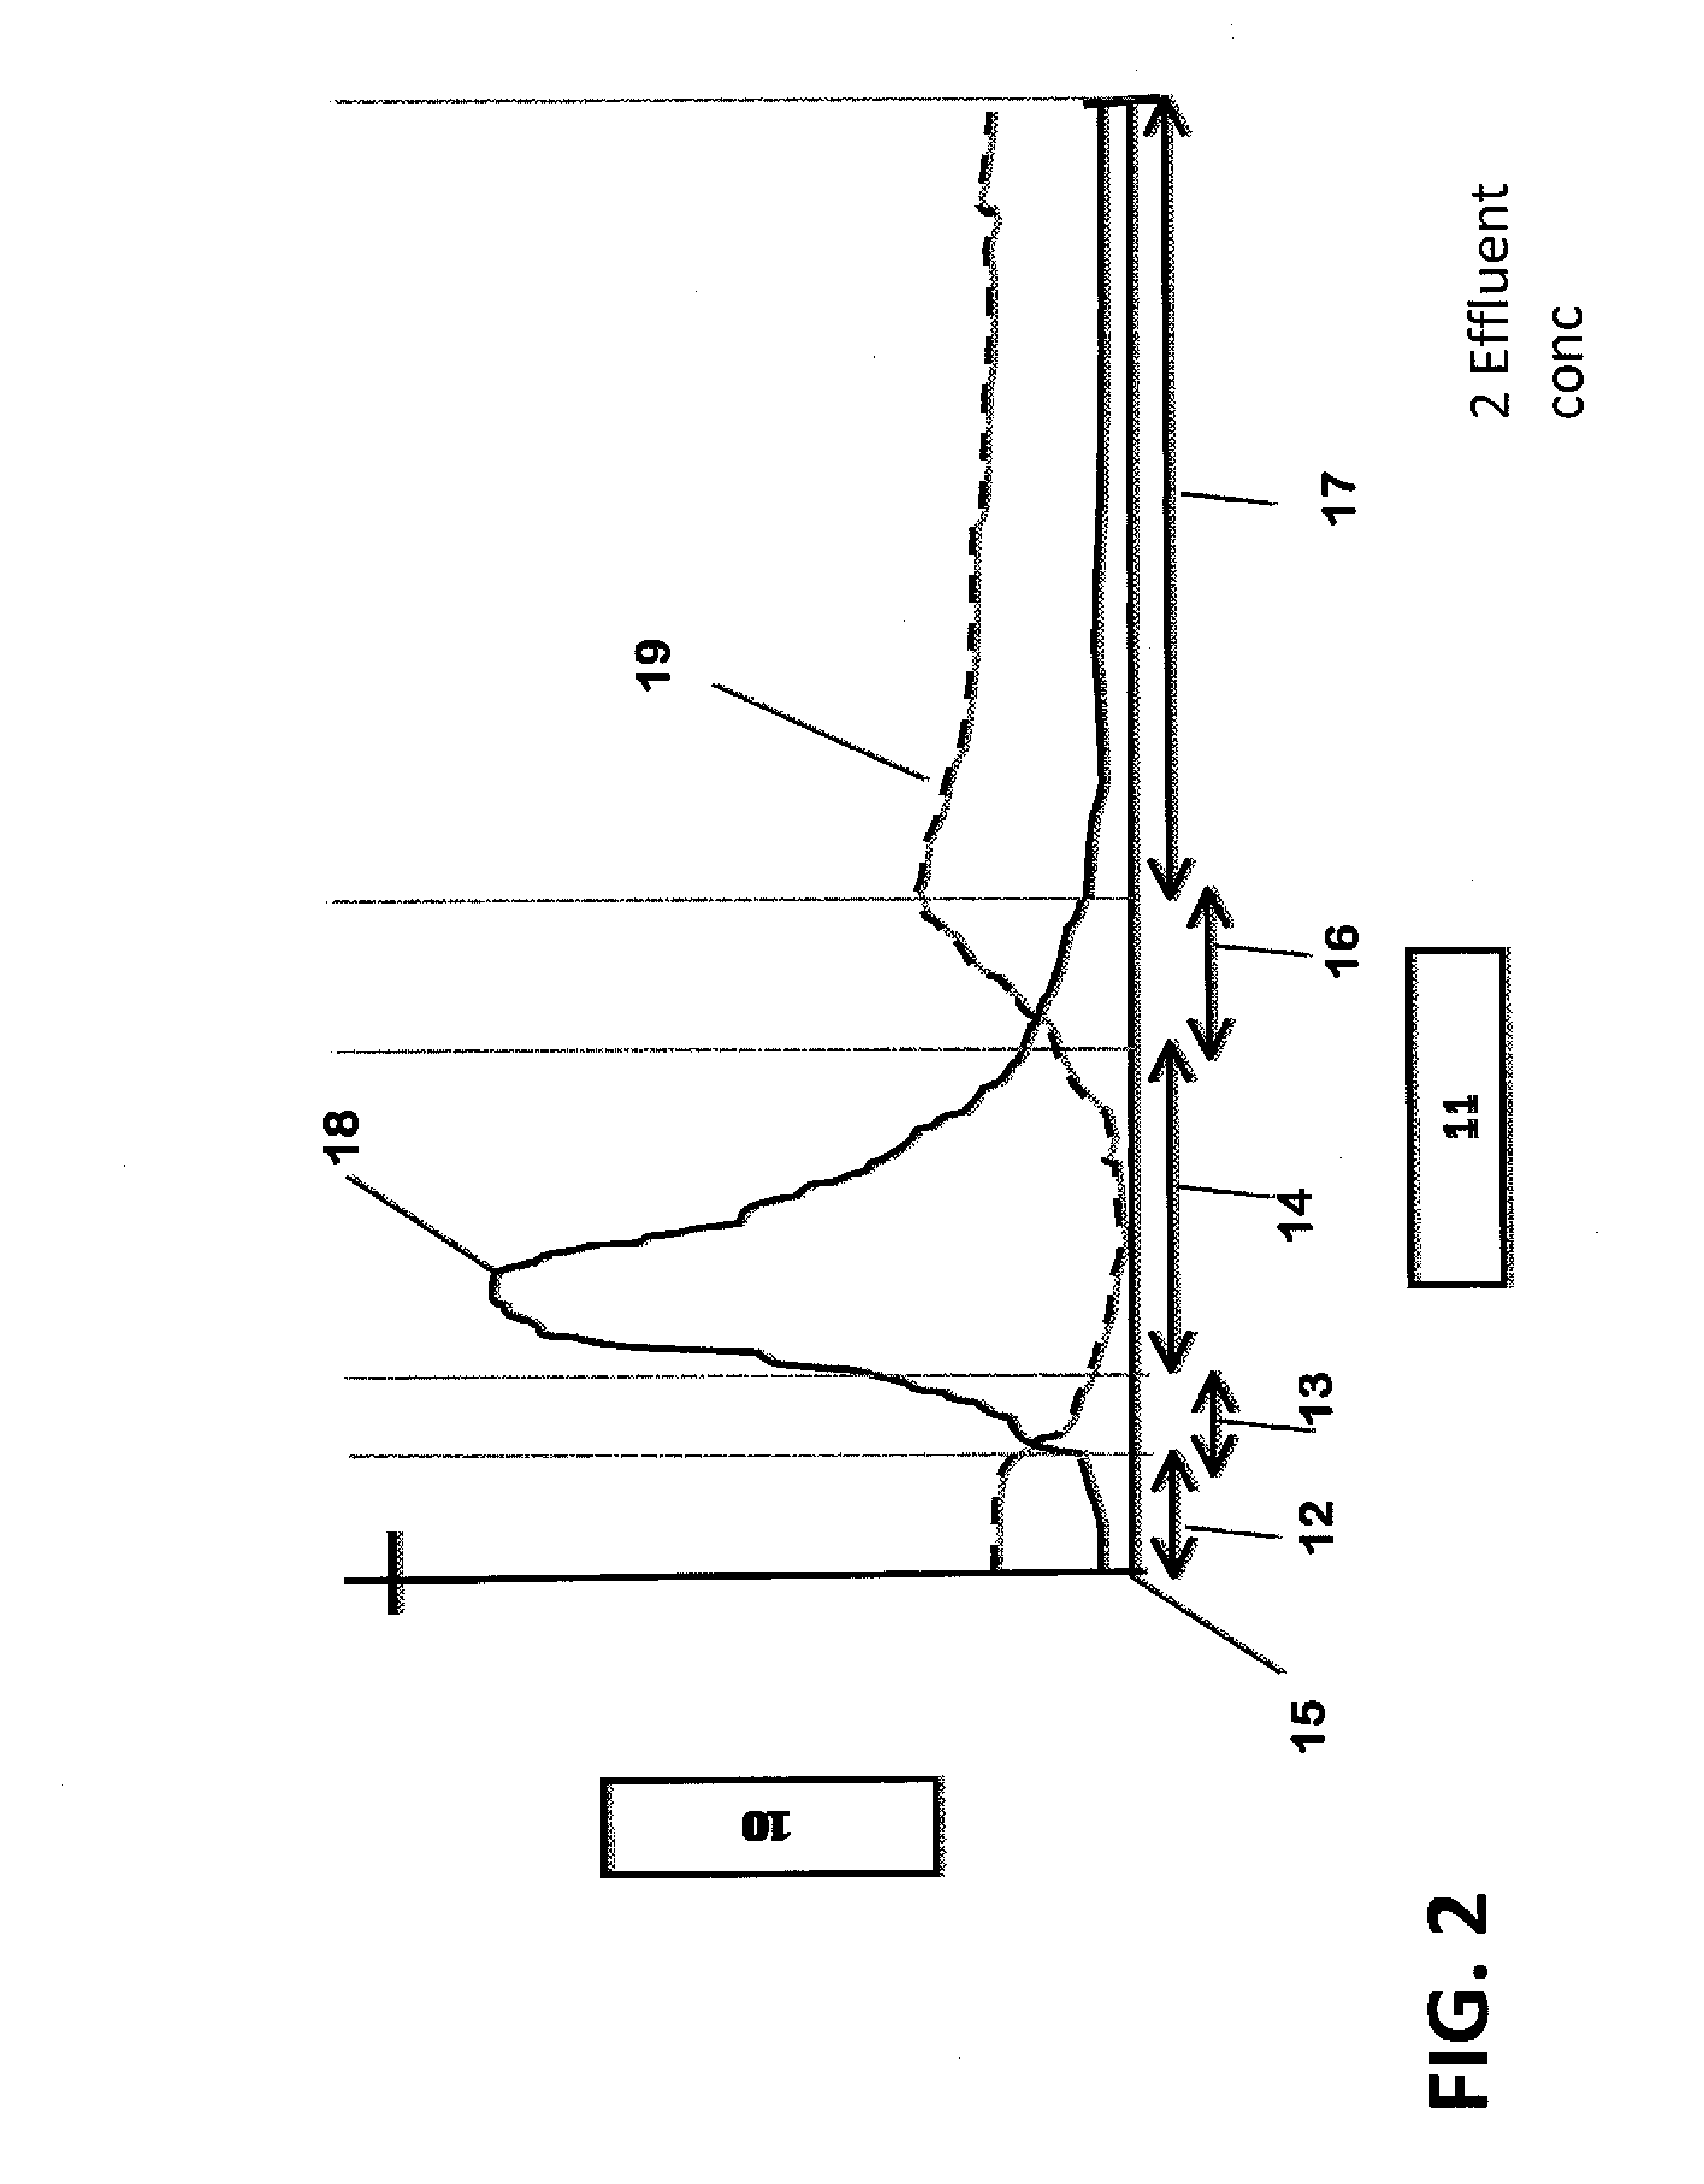 Selective removal of dissolved substances from aqueous solutions